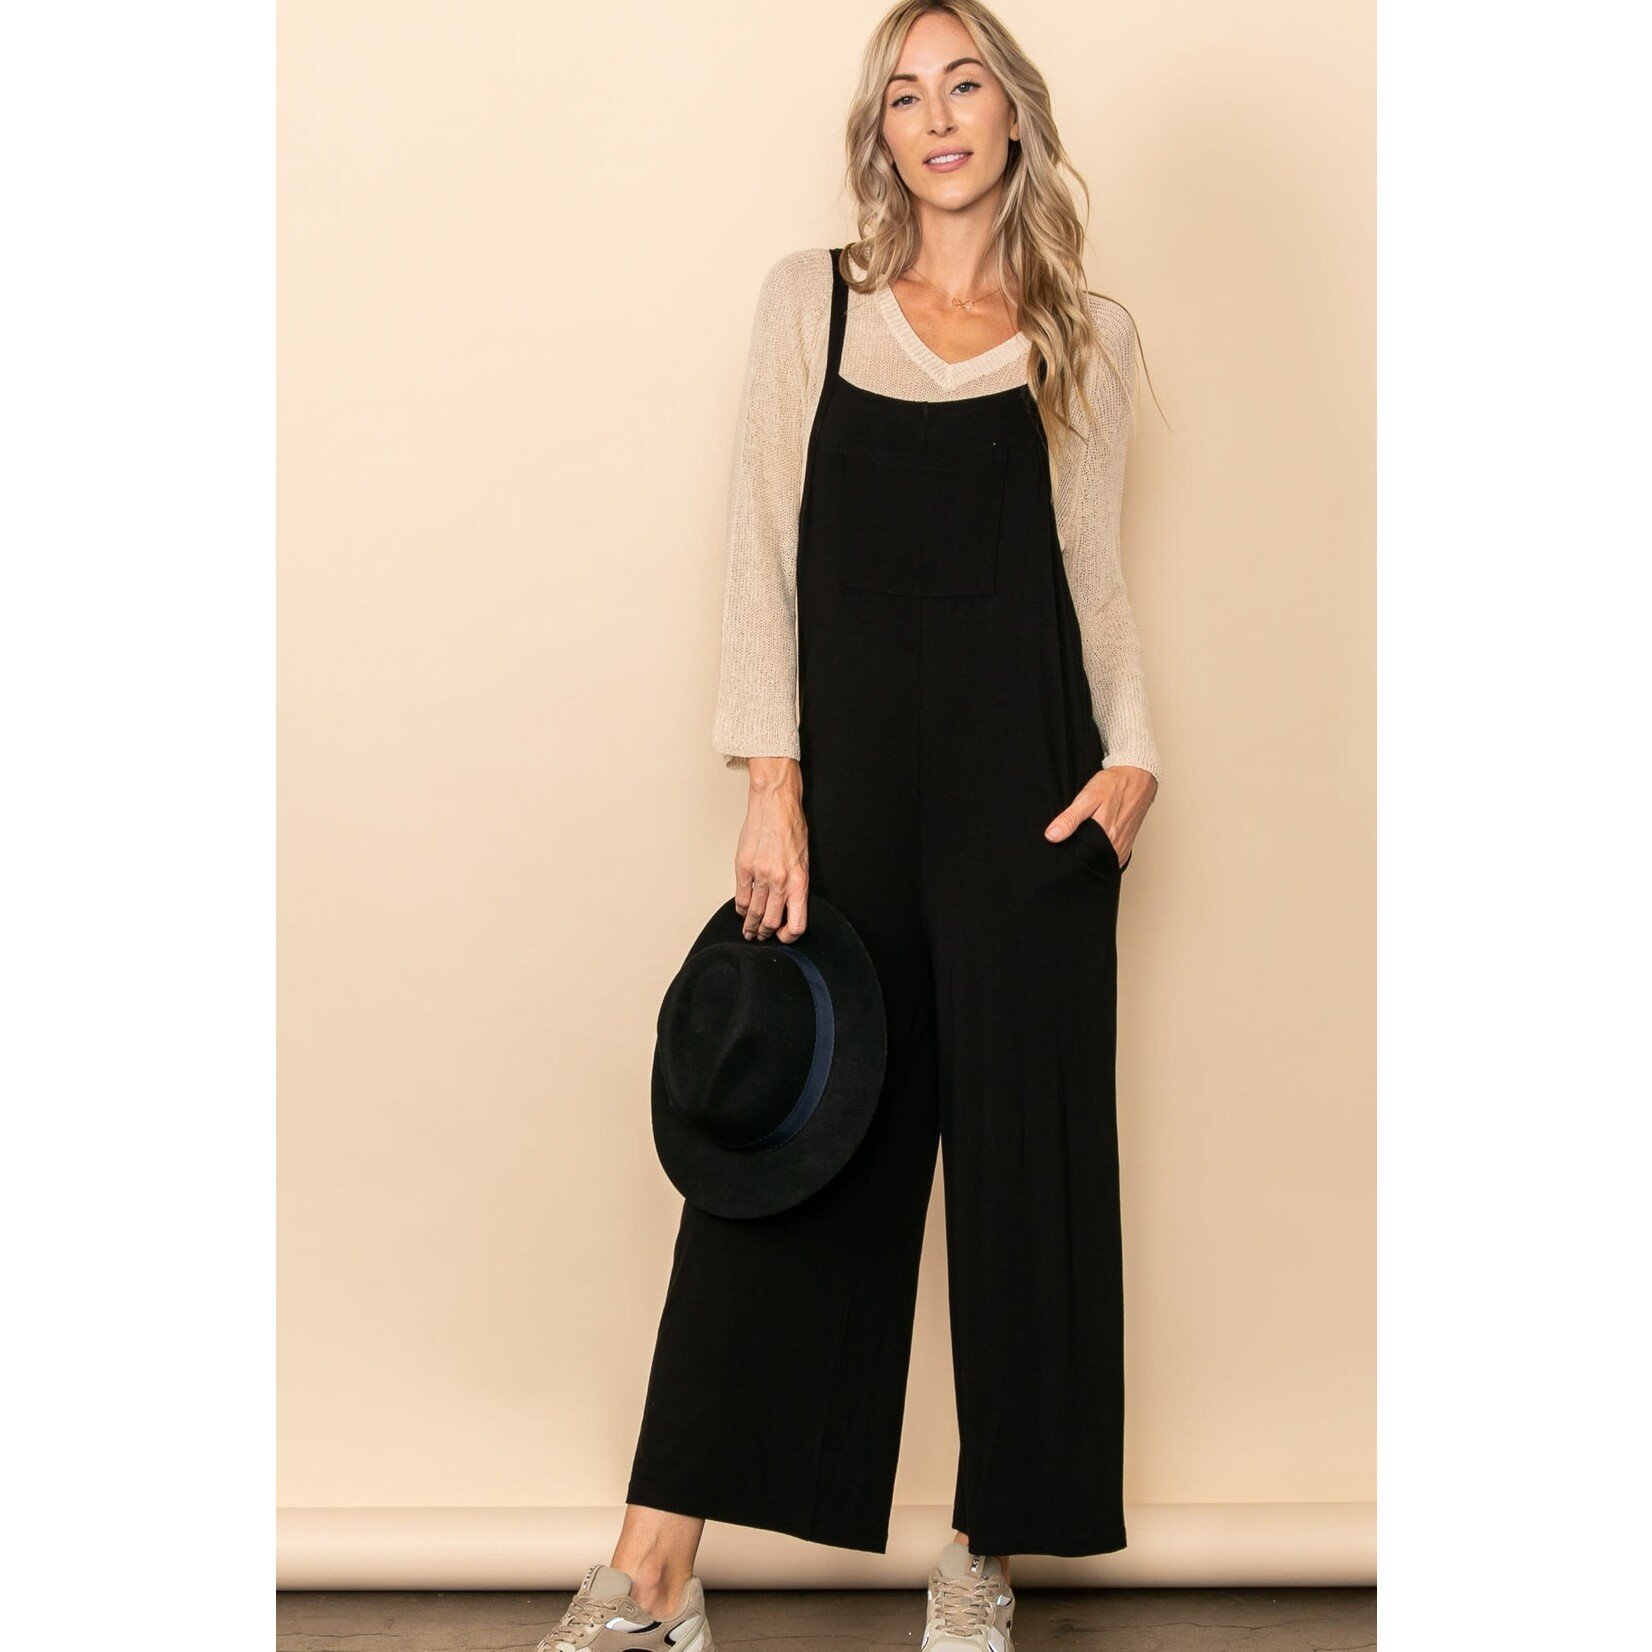 Elloh POCKET DETAILED MODAL OVERALL JUMPSUIT MADE IN USA